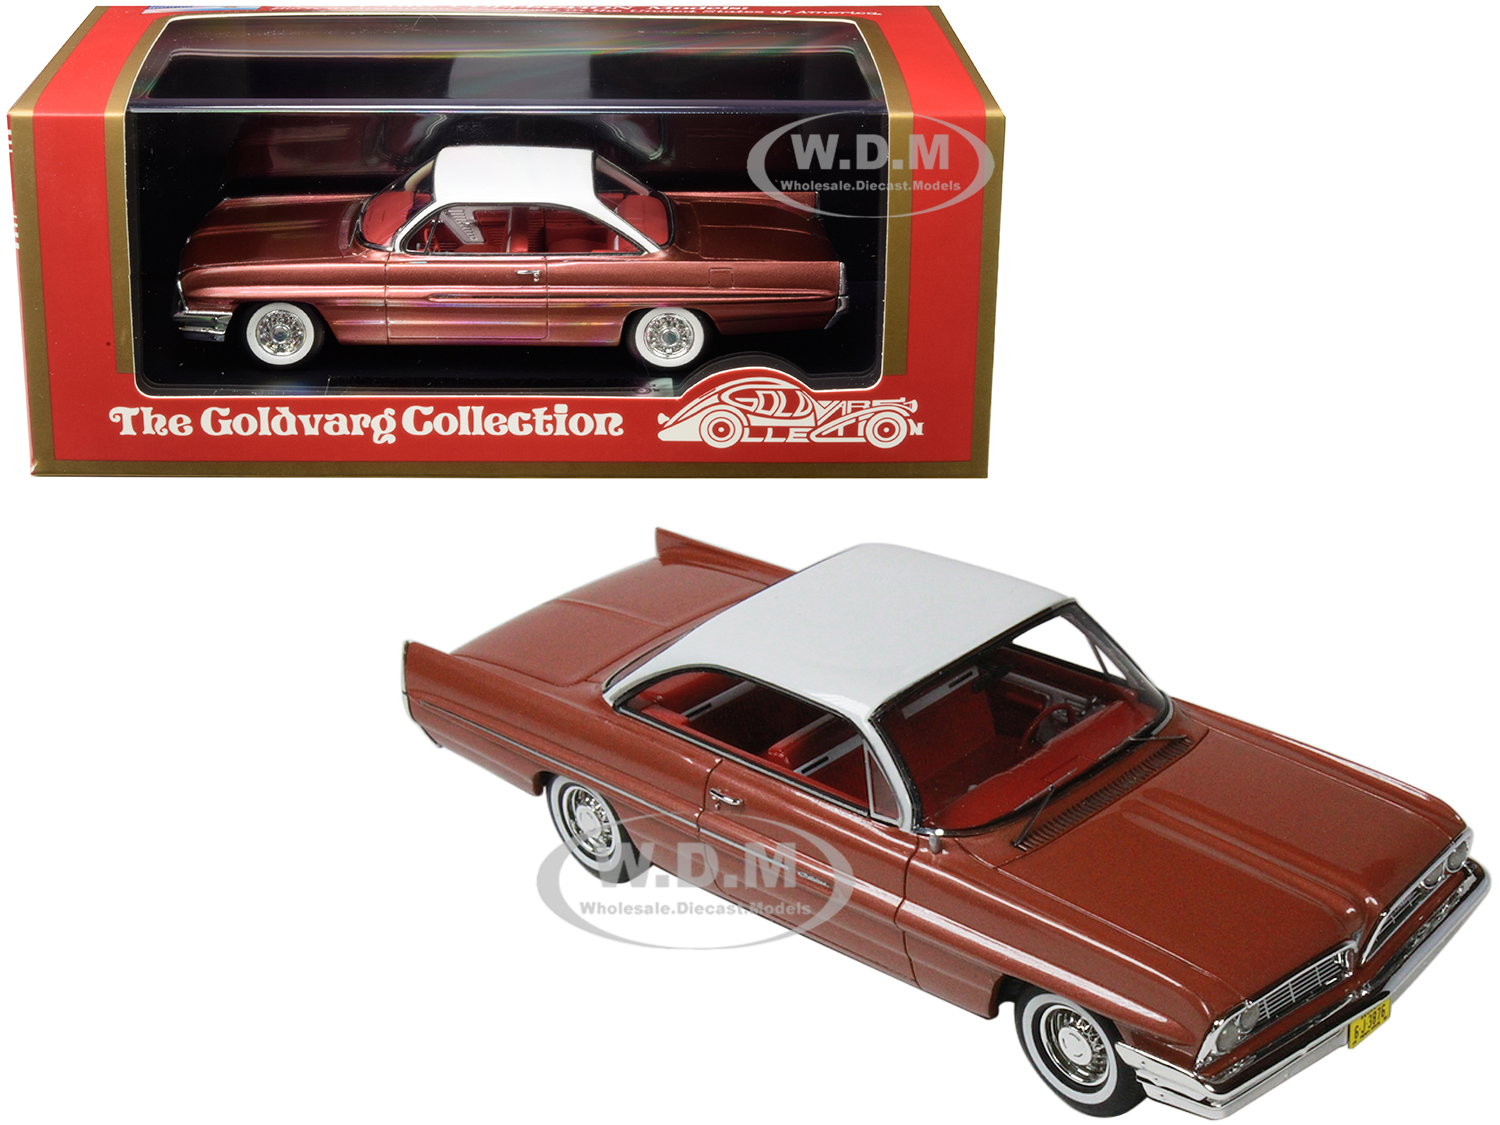 1961 Pontiac Catalina Rose Metallic With White Top And Red Interior Limited Edition To 210 Pieces Worldwide 1/43 Model Car By Goldvarg Collection